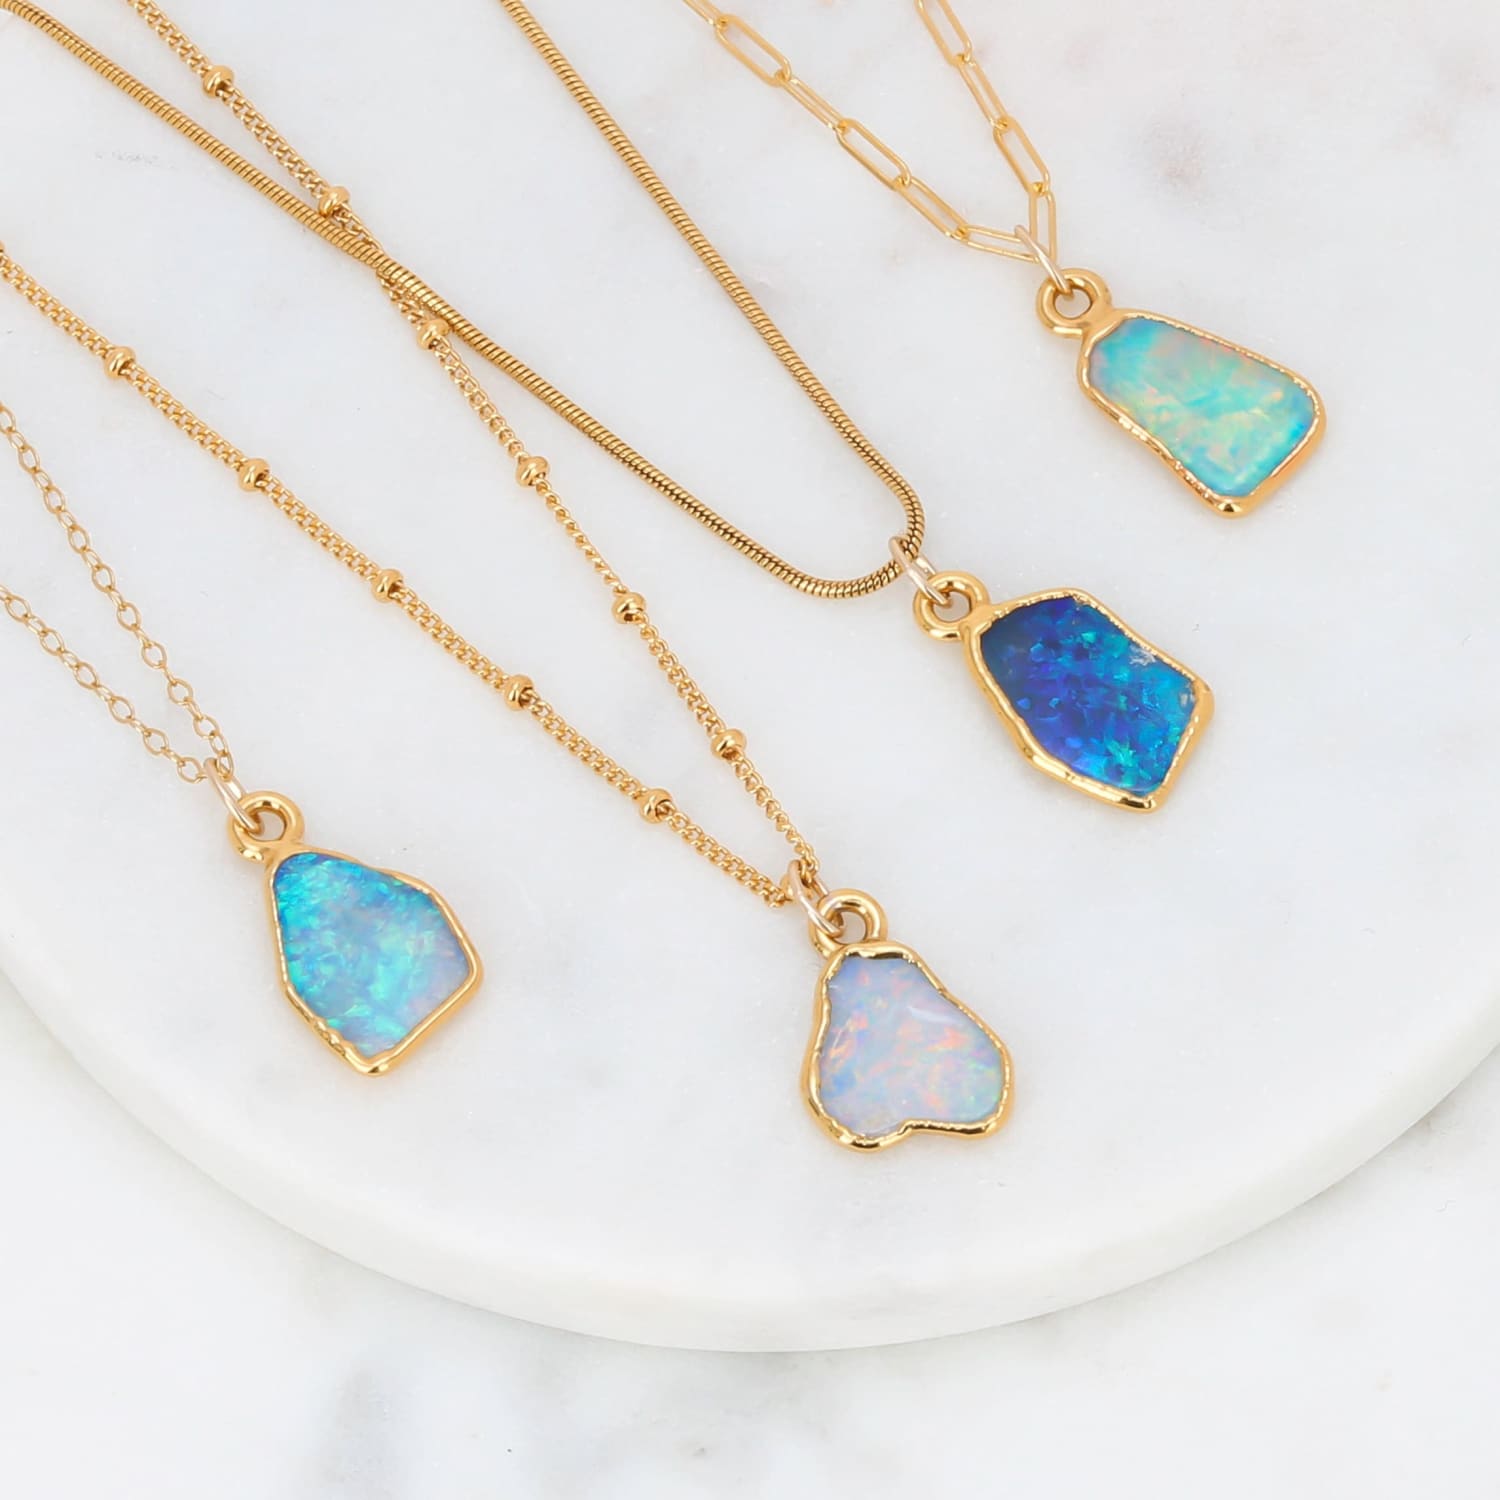 Australian Gold Kangaroo Opal Necklace Pendant / 18ct Gold Plated 925  Sterling Silver / 7x5mm Opal, Chain, Jewelry Lightning Ridge Jewellery -  Etsy Hong Kong | Australian opal jewelry, Opal necklace, Opal pendant  necklace